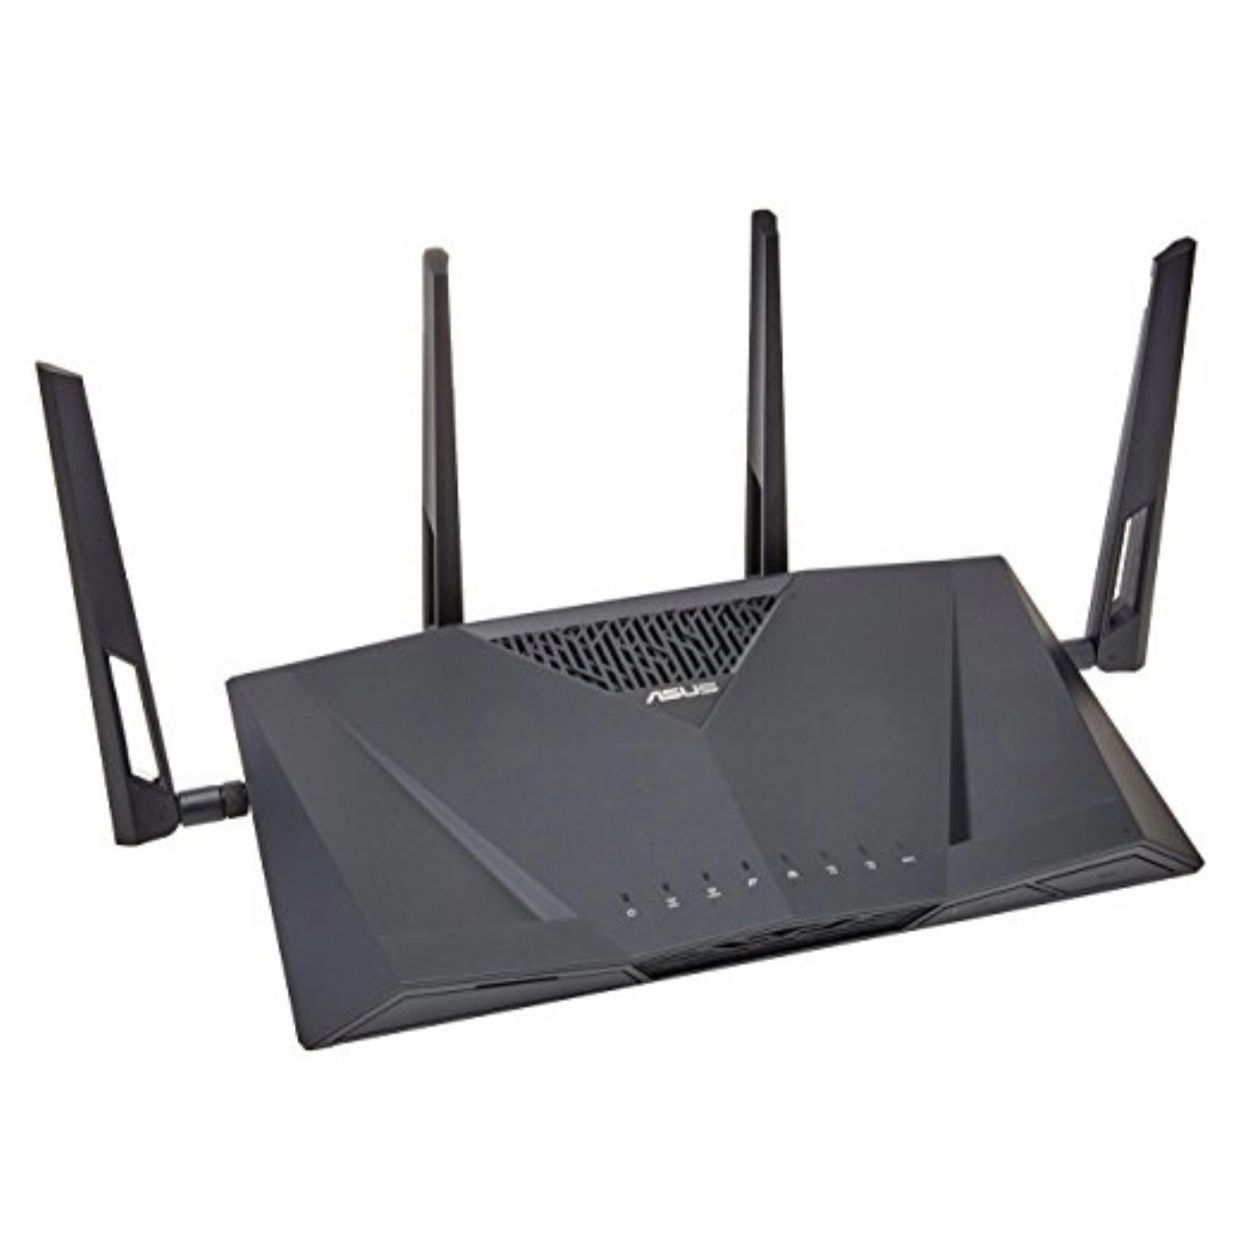 ASUS Rt-ac3100 Wireless Ac3100 Dual Band Gigabit Router PORT X4